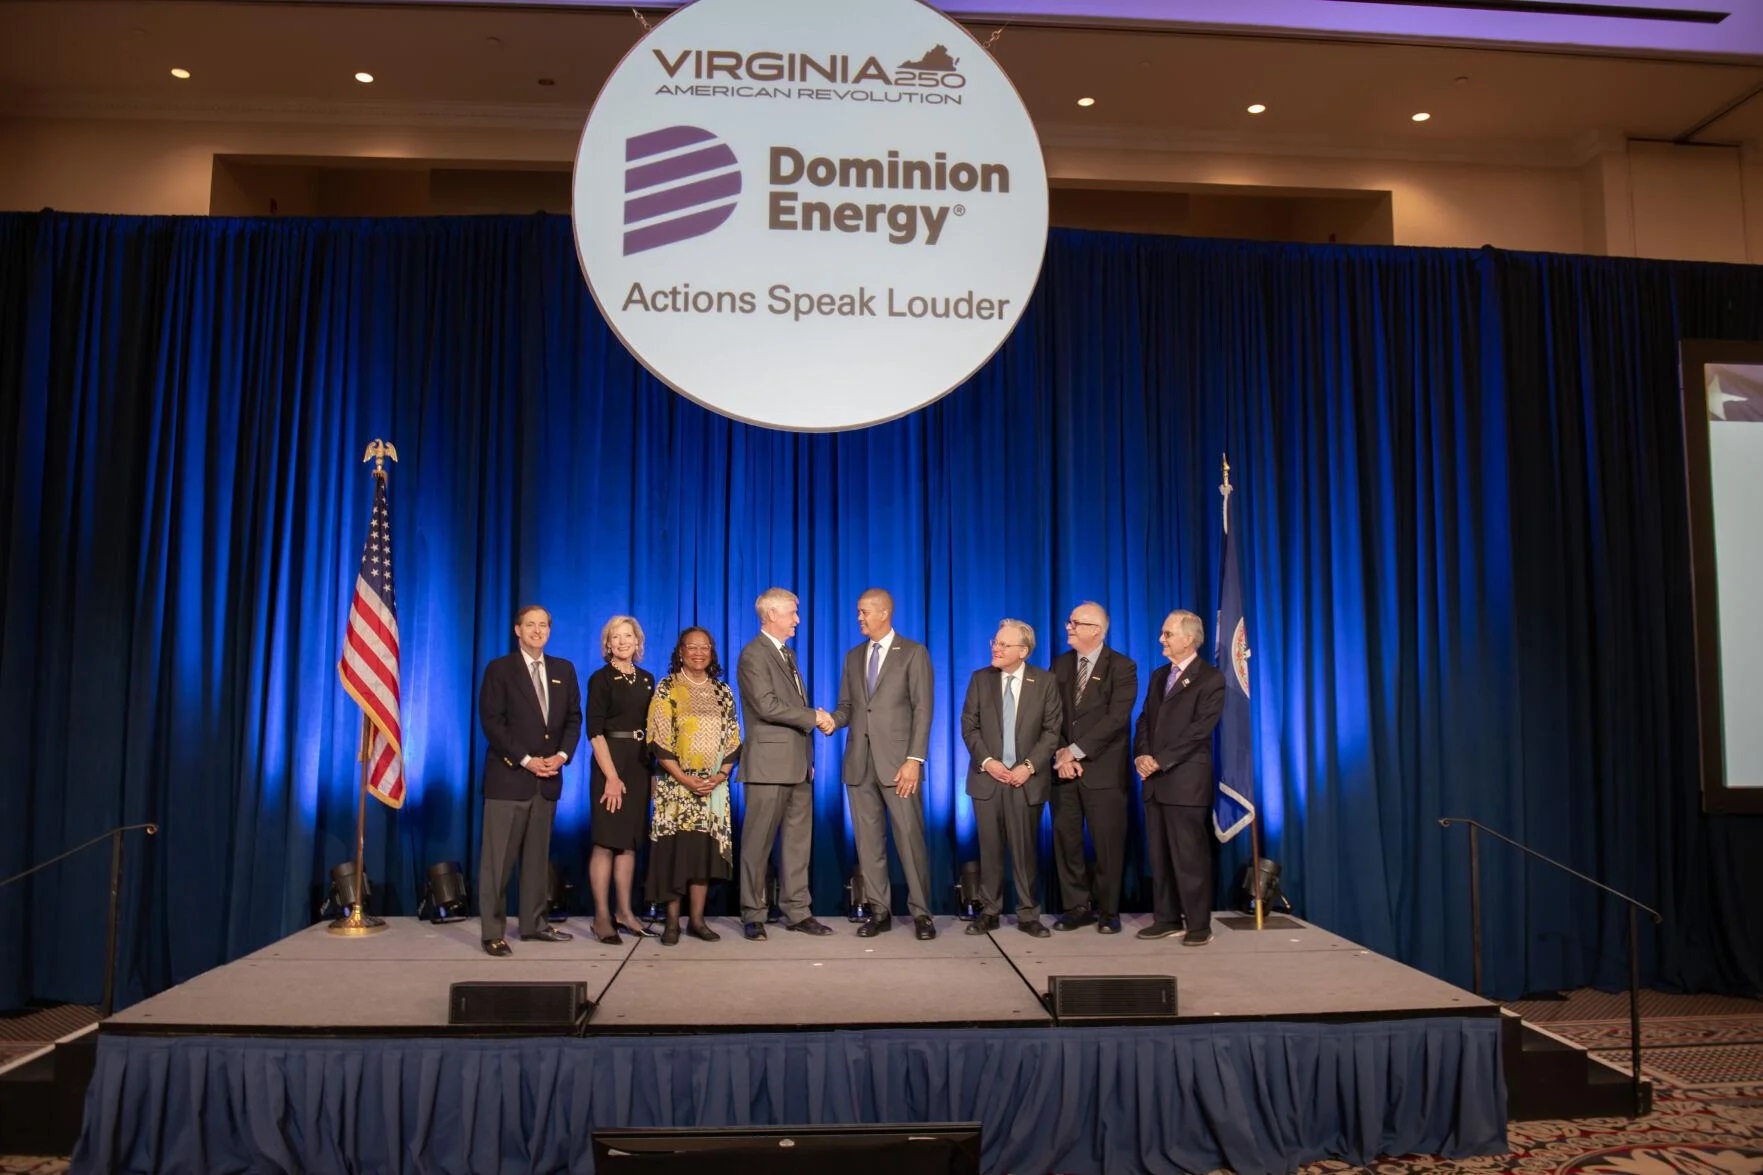 Virginia 250 Commission Announces $1 Million Leadership Donation from Dominion Energy to Fuel Virginia’s Commemoration of the Nation’s 250th Anniversary